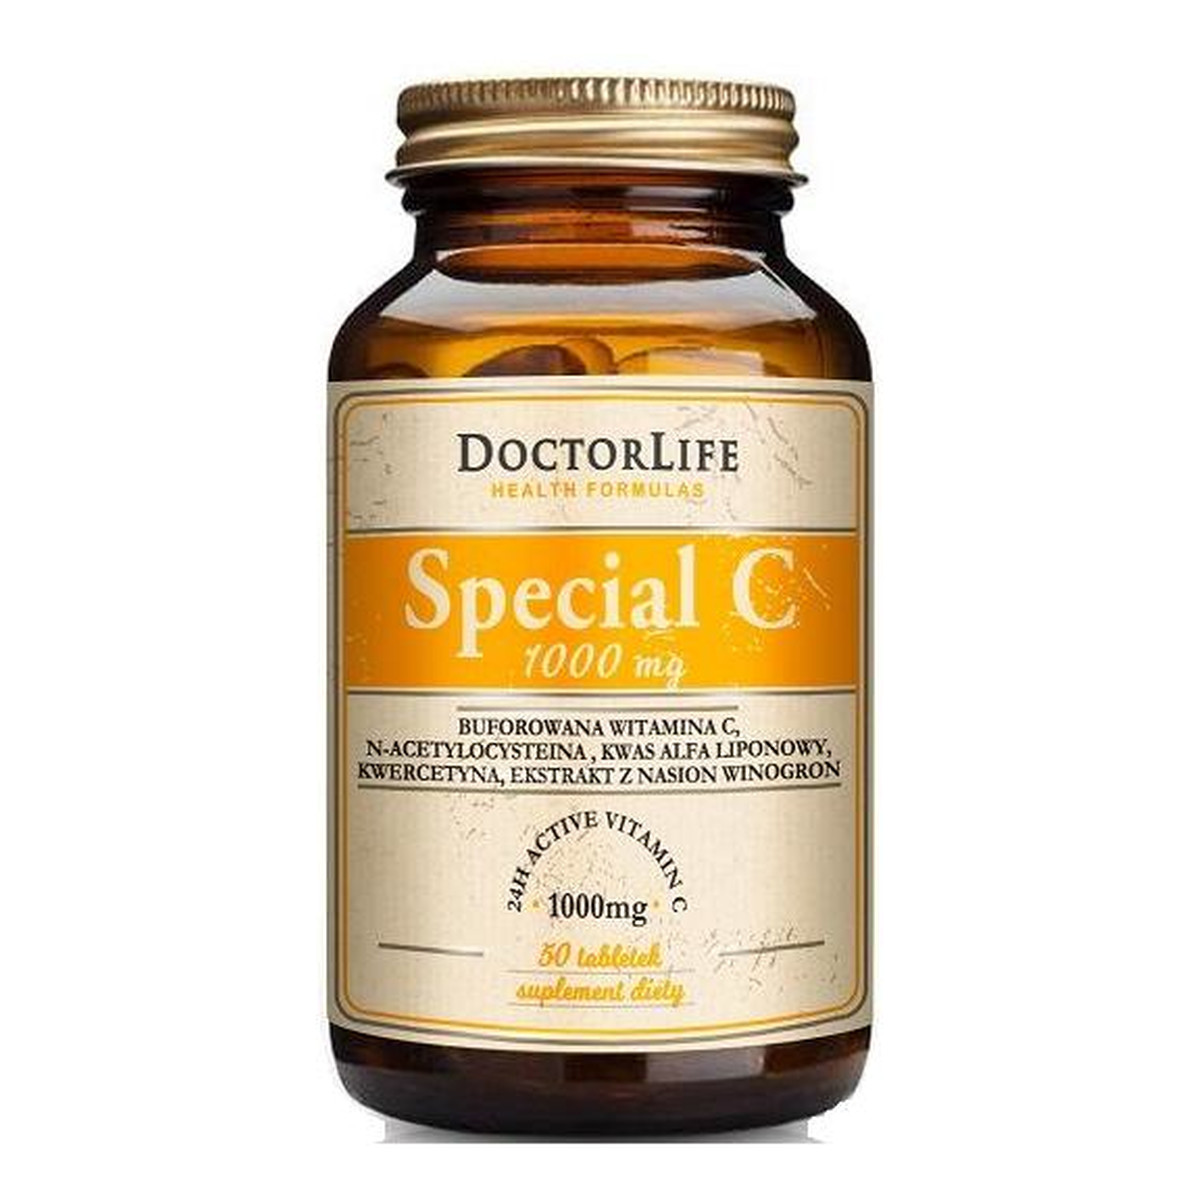 Doctor Life Special C 24h Active Vitamin C 1000mg suplement diety 50 tabletek